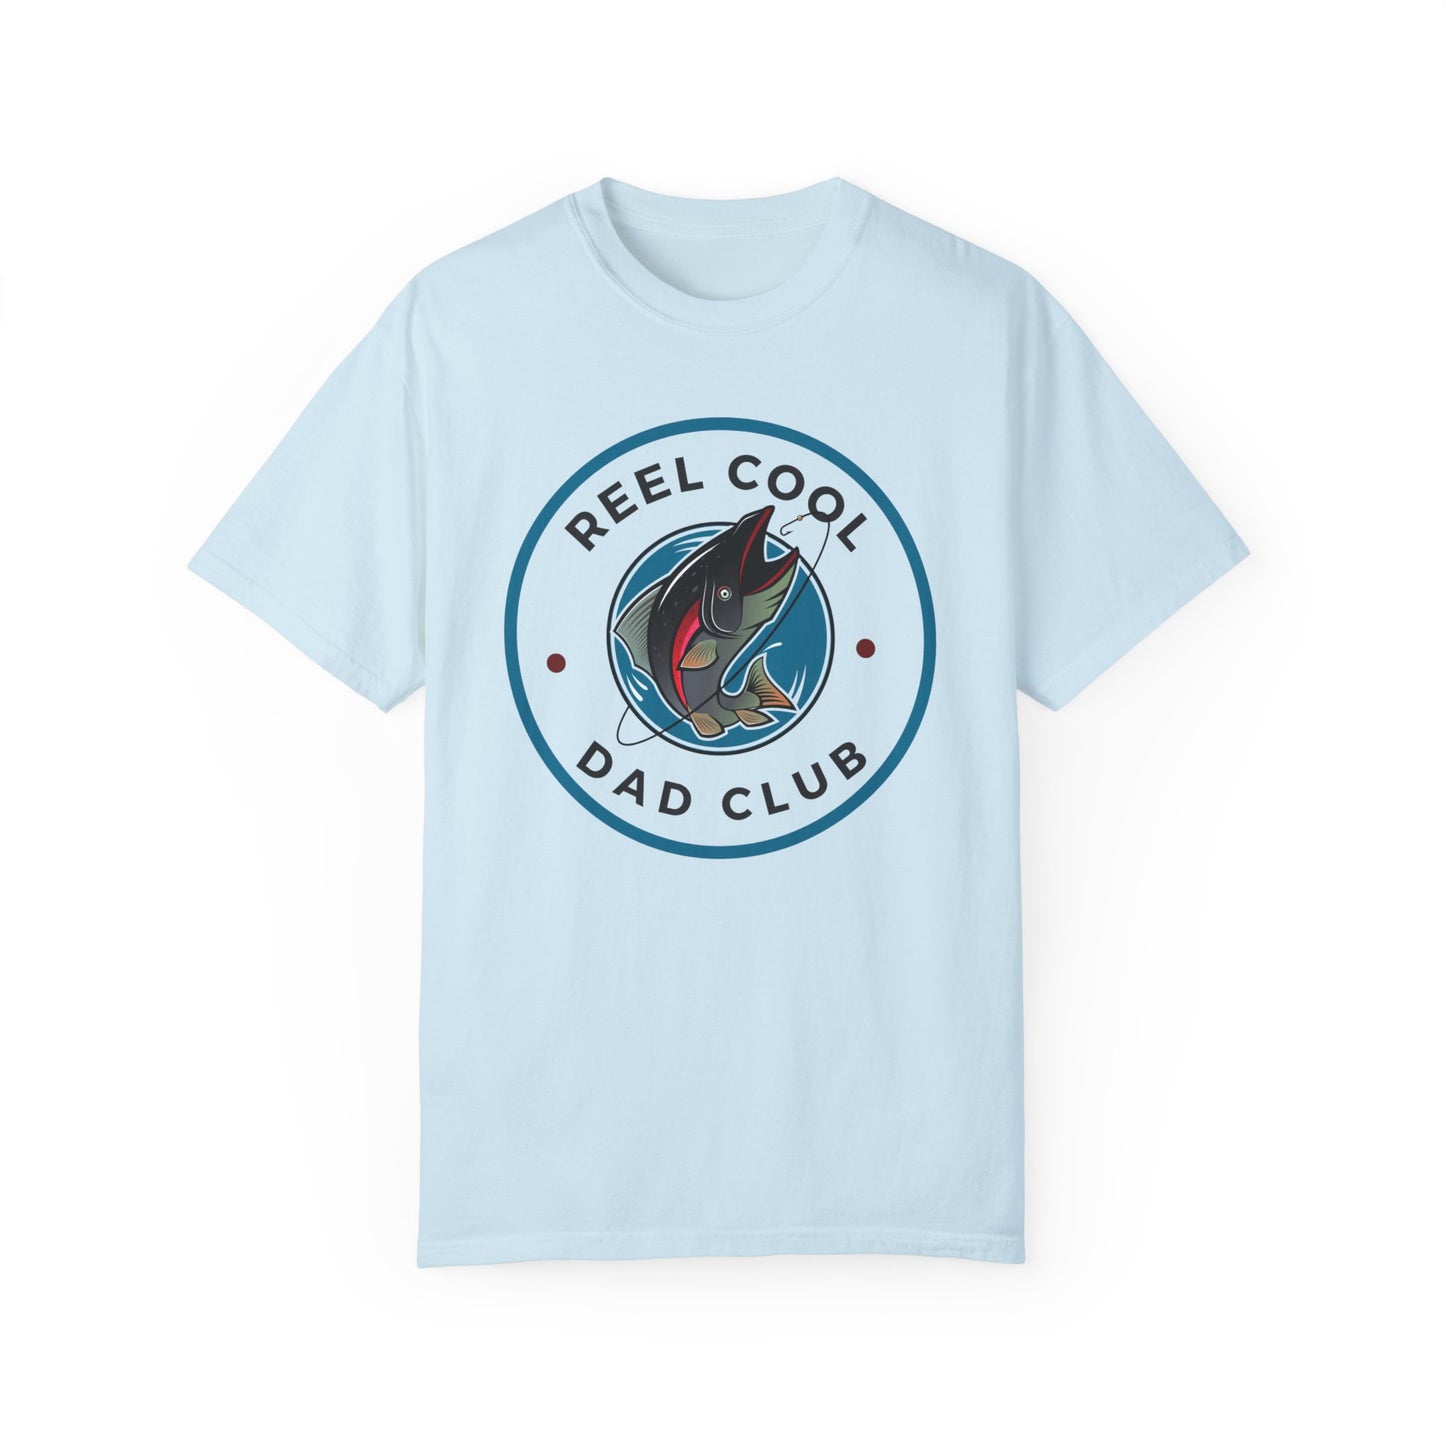 Reel Cool Dads Club T-Shirt - Comfort Colors 1717, Ultra-Soft Ring-Spun Cotton, Relaxed Fit